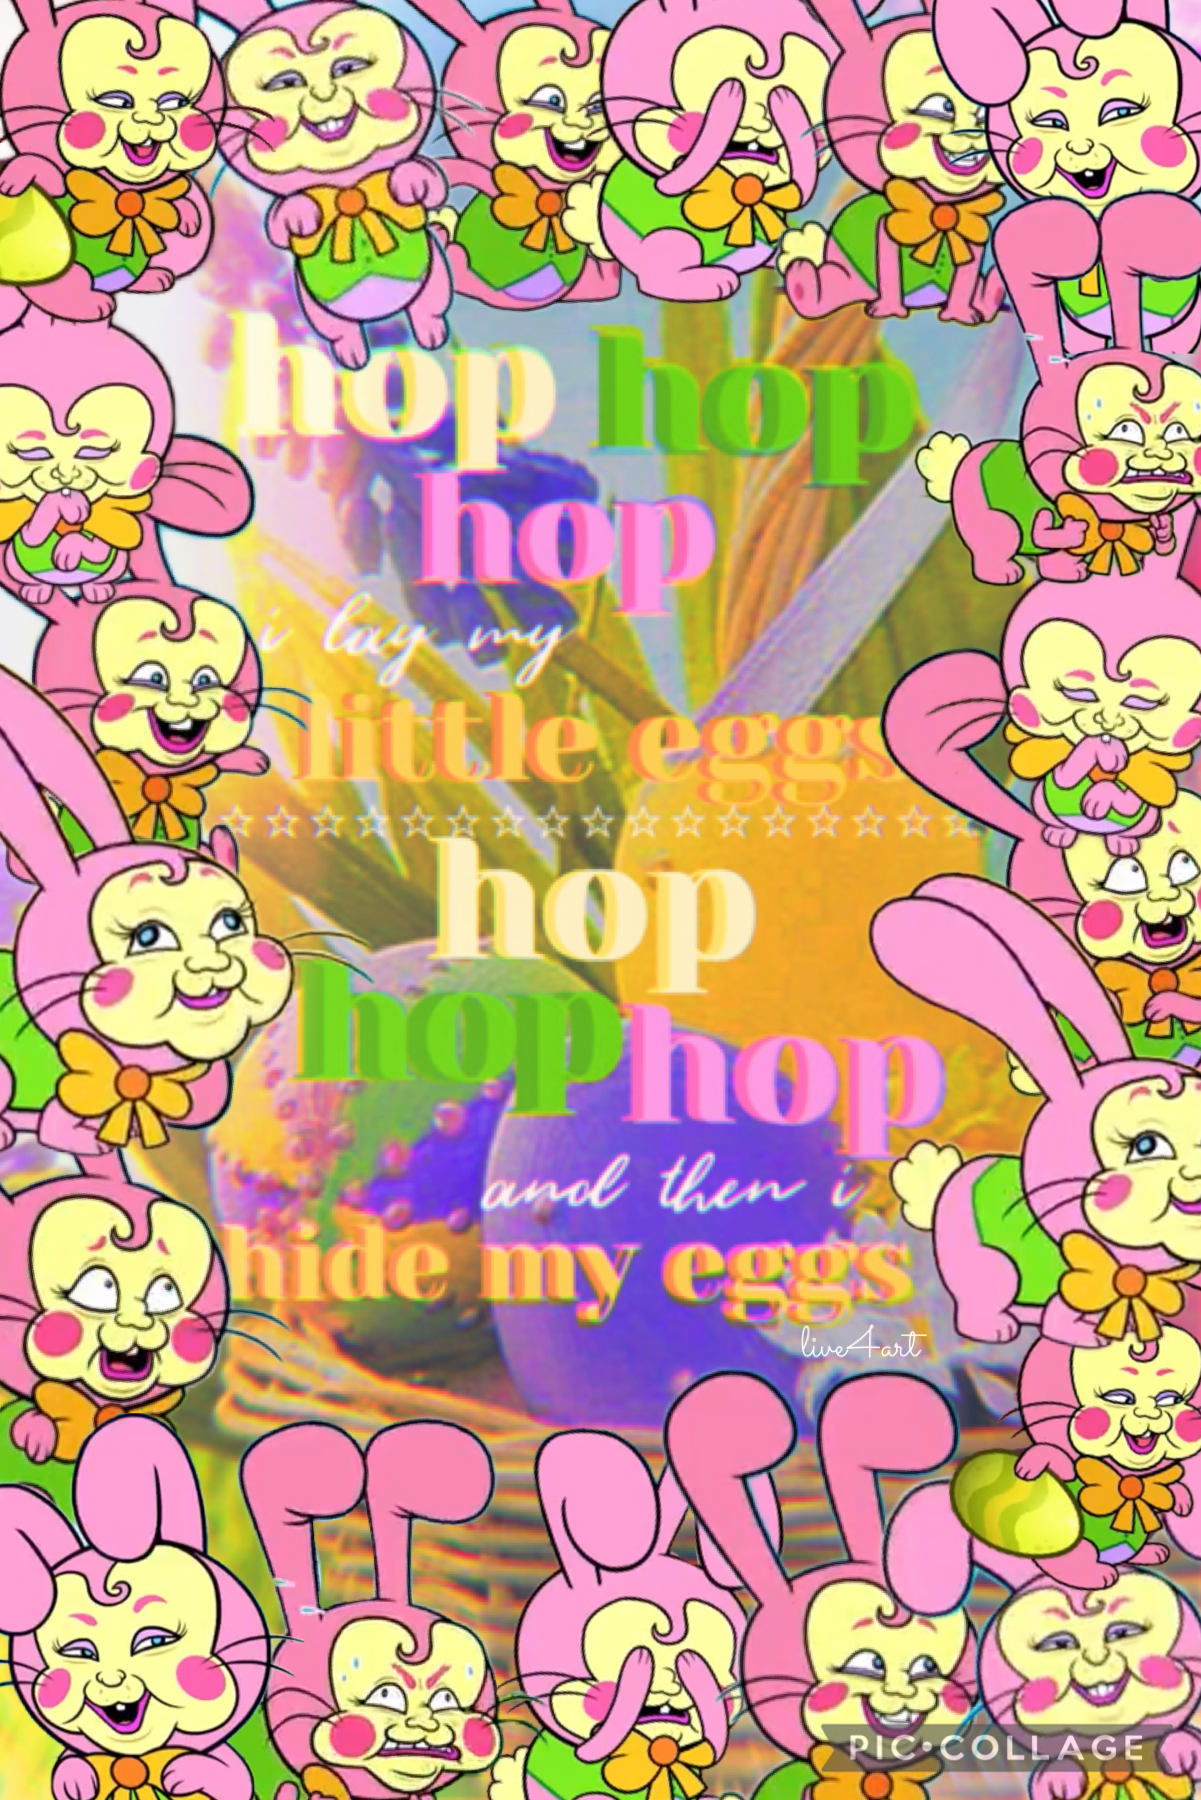 4.4.21 tap
happy easter! this is from the teen titans go easter episode i saw it and i was obsessed i might need to watch the rest of the series now lol
♡ but don't forget the real reason for this holiday is that JESUS DEFEATED DEATH! ♡ 